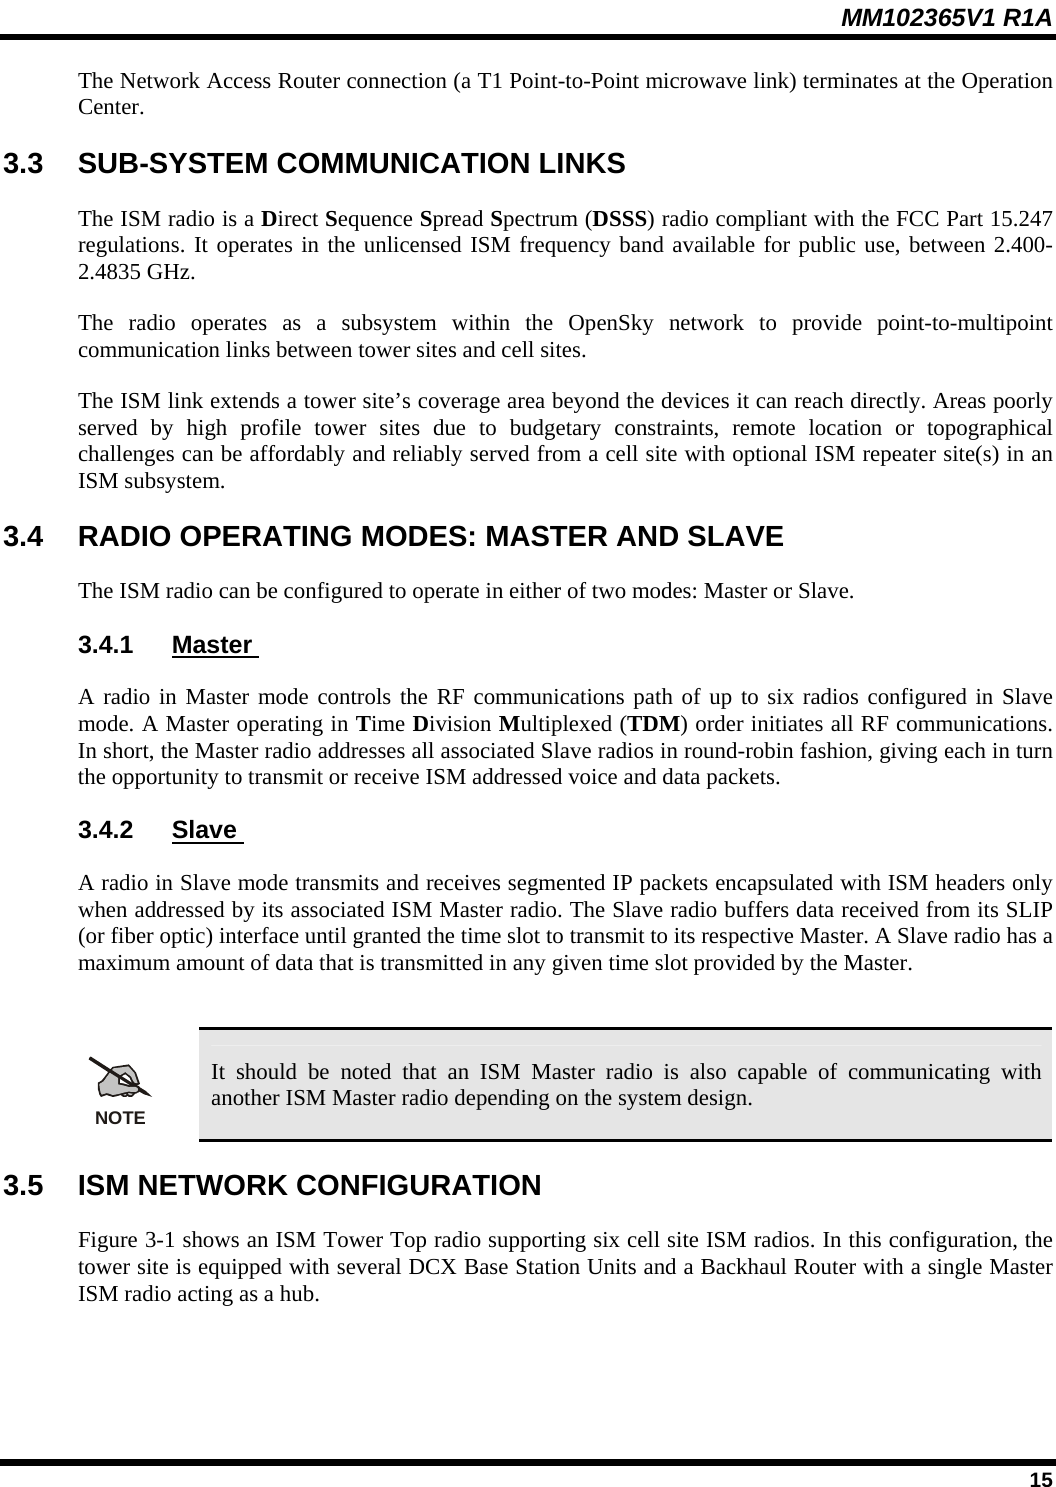 MM102365V1 R1A The Network Access Router connection (a T1 Point-to-Point microwave link) terminates at the Operation Center.  3.3  SUB-SYSTEM COMMUNICATION LINKS The ISM radio is a Direct Sequence Spread Spectrum (DSSS) radio compliant with the FCC Part 15.247 regulations. It operates in the unlicensed ISM frequency band available for public use, between 2.400-2.4835 GHz.  The radio operates as a subsystem within the OpenSky network to provide point-to-multipoint communication links between tower sites and cell sites.  The ISM link extends a tower site’s coverage area beyond the devices it can reach directly. Areas poorly served by high profile tower sites due to budgetary constraints, remote location or topographical challenges can be affordably and reliably served from a cell site with optional ISM repeater site(s) in an ISM subsystem. 3.4  RADIO OPERATING MODES: MASTER AND SLAVE The ISM radio can be configured to operate in either of two modes: Master or Slave. 3.4.1  Master  A radio in Master mode controls the RF communications path of up to six radios configured in Slave mode. A Master operating in Time Division Multiplexed (TDM) order initiates all RF communications. In short, the Master radio addresses all associated Slave radios in round-robin fashion, giving each in turn the opportunity to transmit or receive ISM addressed voice and data packets. 3.4.2  Slave  A radio in Slave mode transmits and receives segmented IP packets encapsulated with ISM headers only when addressed by its associated ISM Master radio. The Slave radio buffers data received from its SLIP (or fiber optic) interface until granted the time slot to transmit to its respective Master. A Slave radio has a maximum amount of data that is transmitted in any given time slot provided by the Master.  NOTE It should be noted that an ISM Master radio is also capable of communicating with another ISM Master radio depending on the system design.  3.5  ISM NETWORK CONFIGURATION Figure 3-1 shows an ISM Tower Top radio supporting six cell site ISM radios. In this configuration, the tower site is equipped with several DCX Base Station Units and a Backhaul Router with a single Master ISM radio acting as a hub.  15 